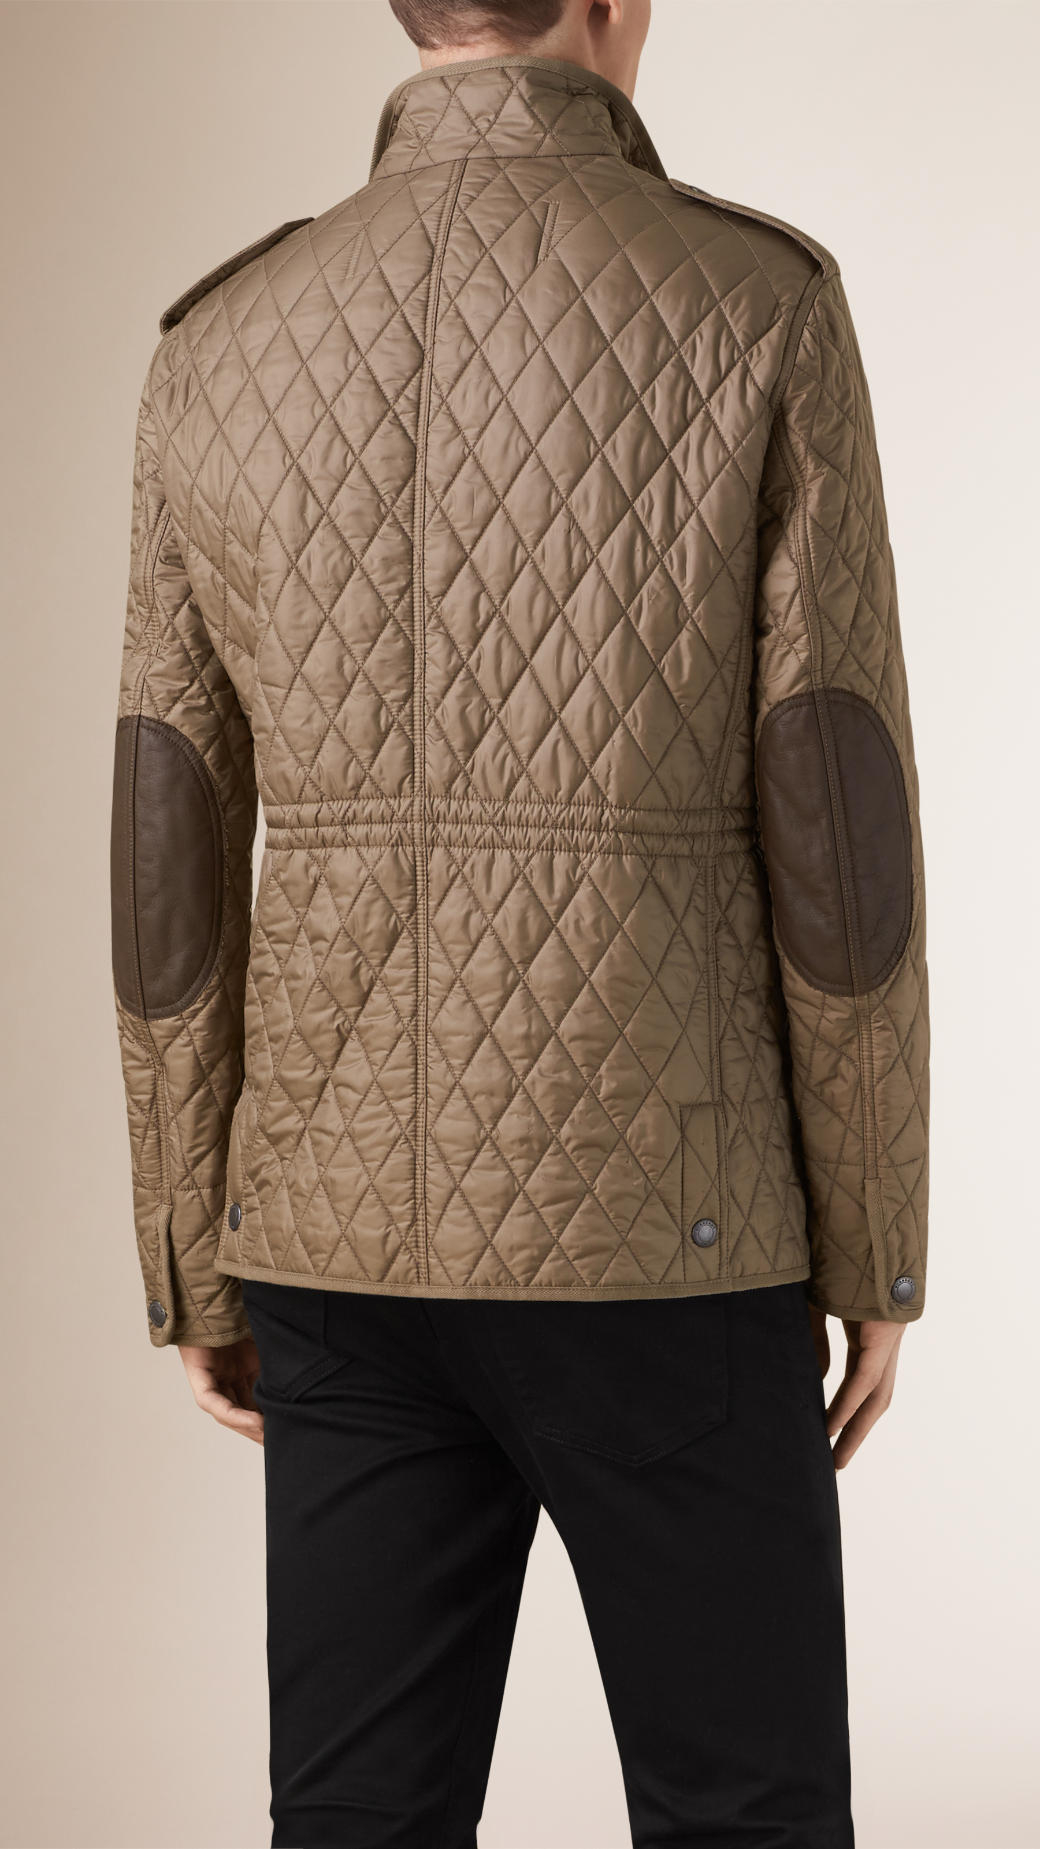 Lyst - Burberry Diamond Quilted Field Jacket in Natural for Men